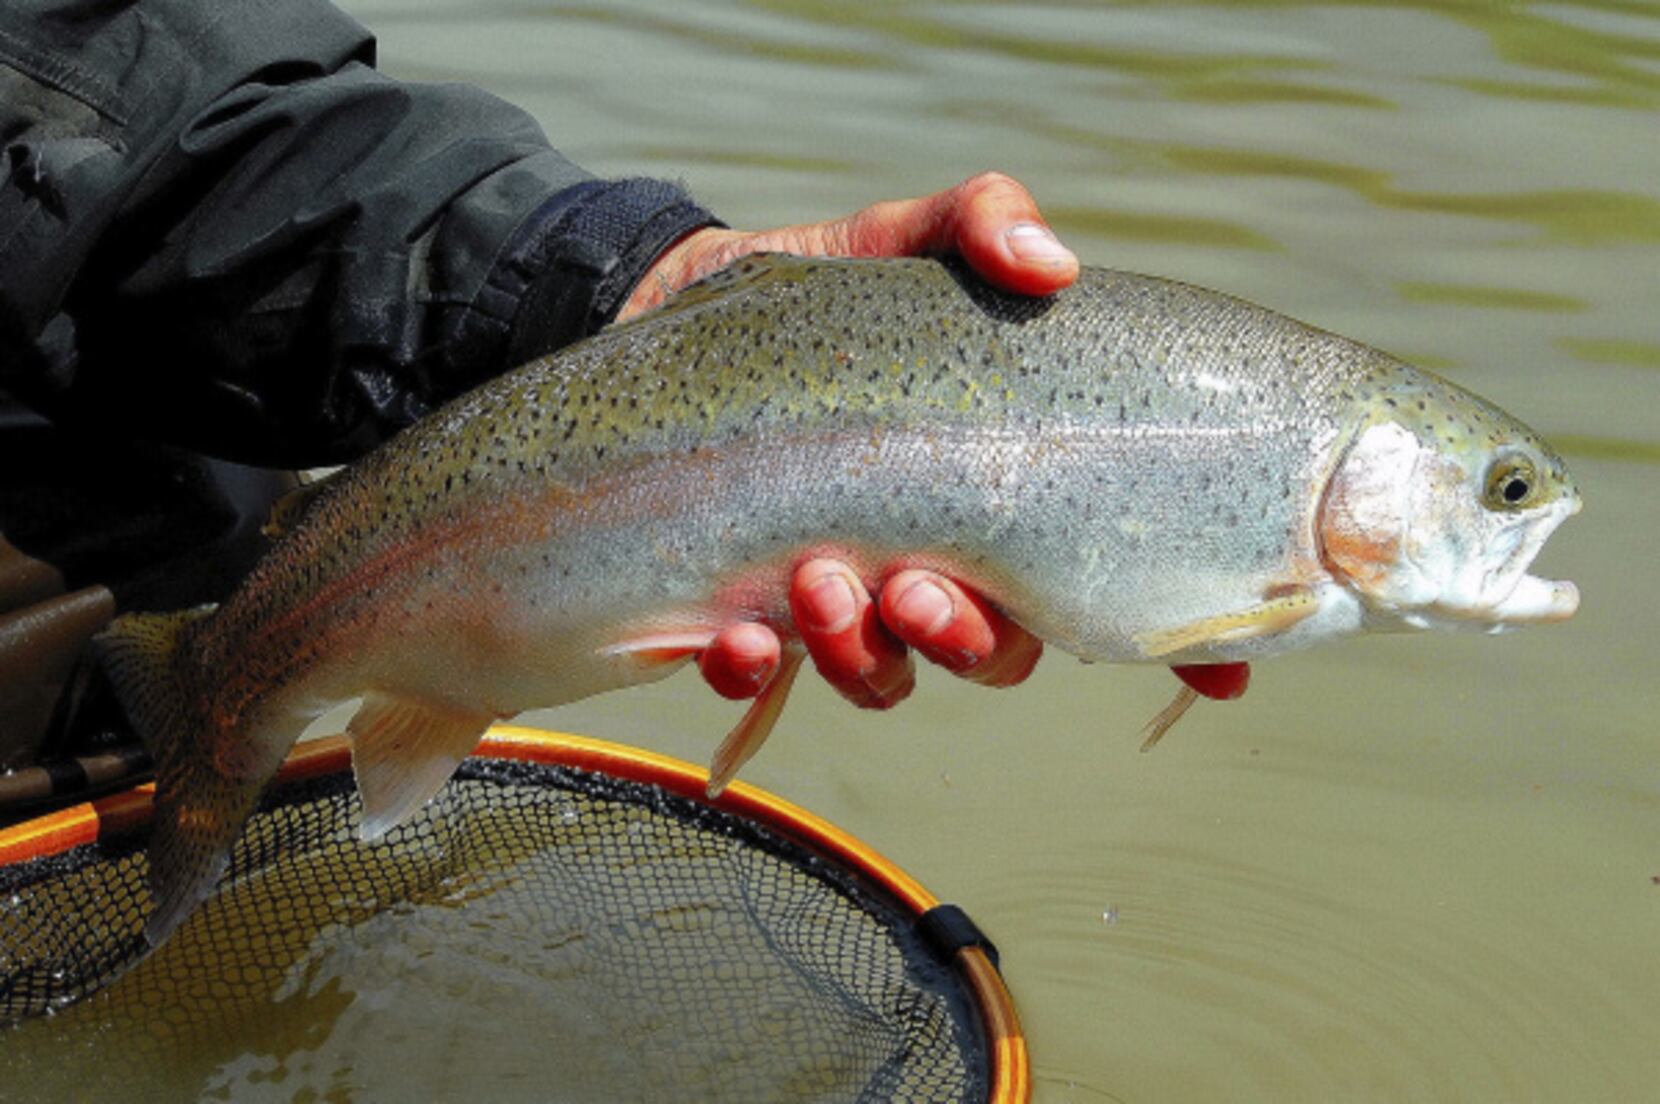 Low water's effect on trout stocking may not be as harsh as feared